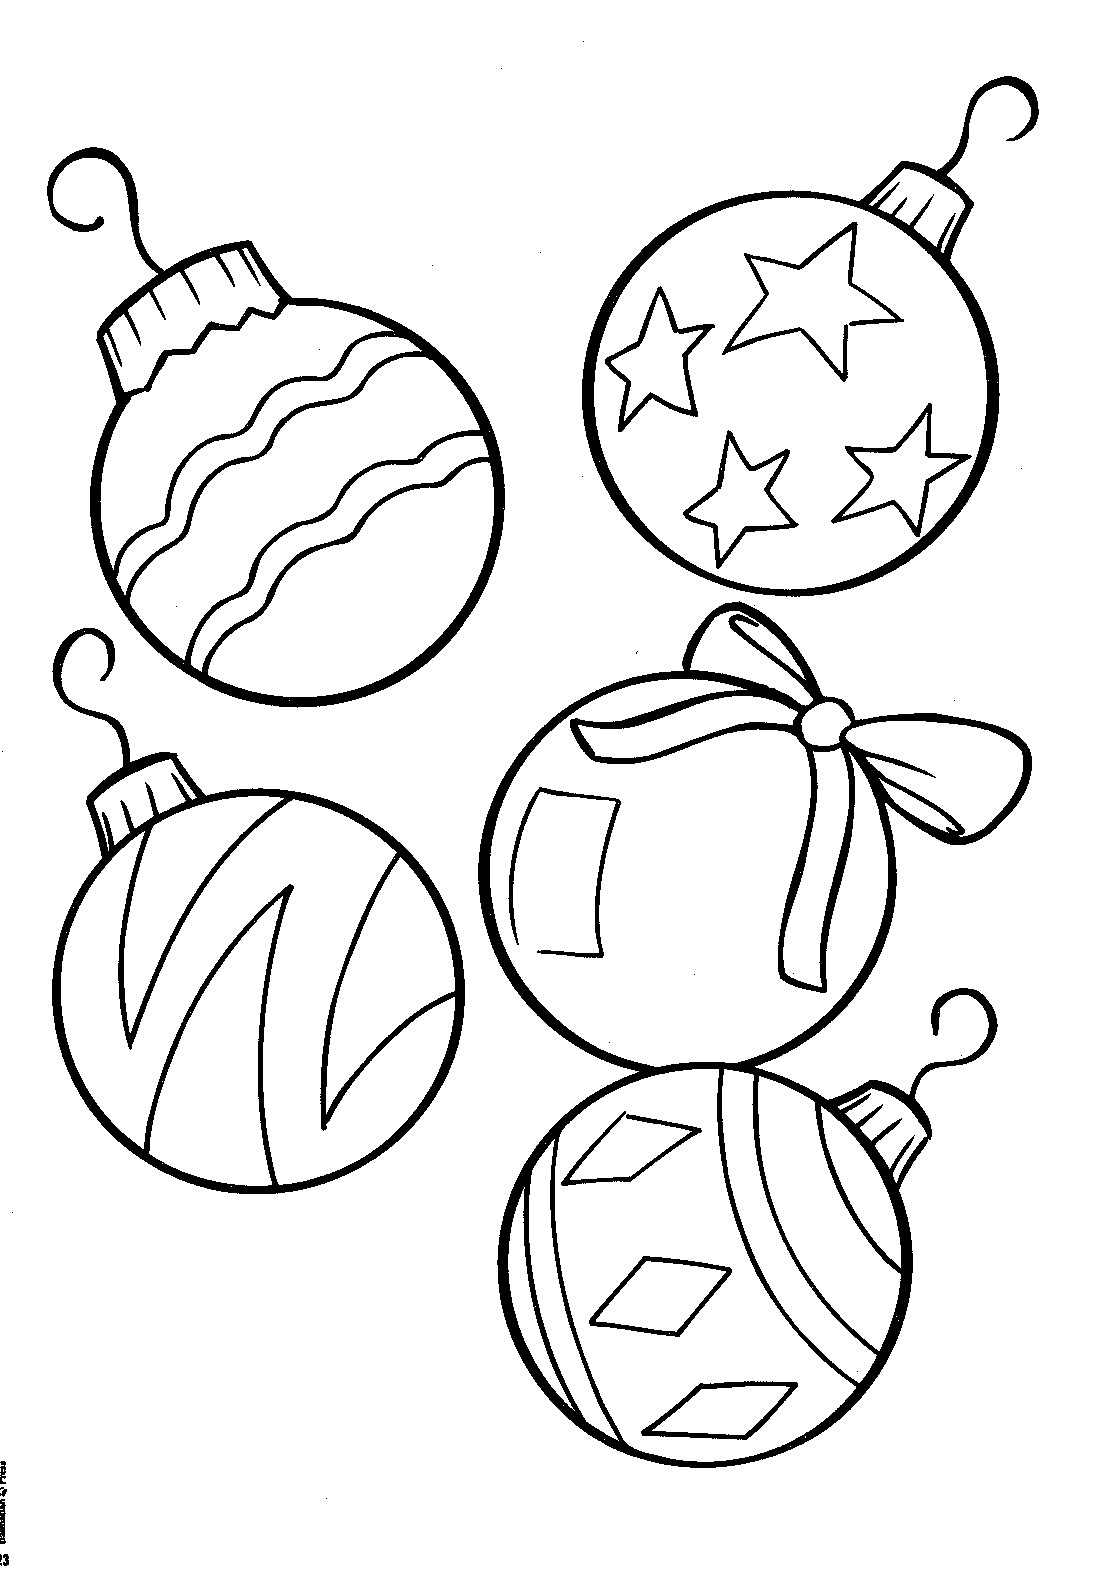 Christmas Coloring Sheets For Kids
 Coloring Pages Christmas Coloring Pages for Kids